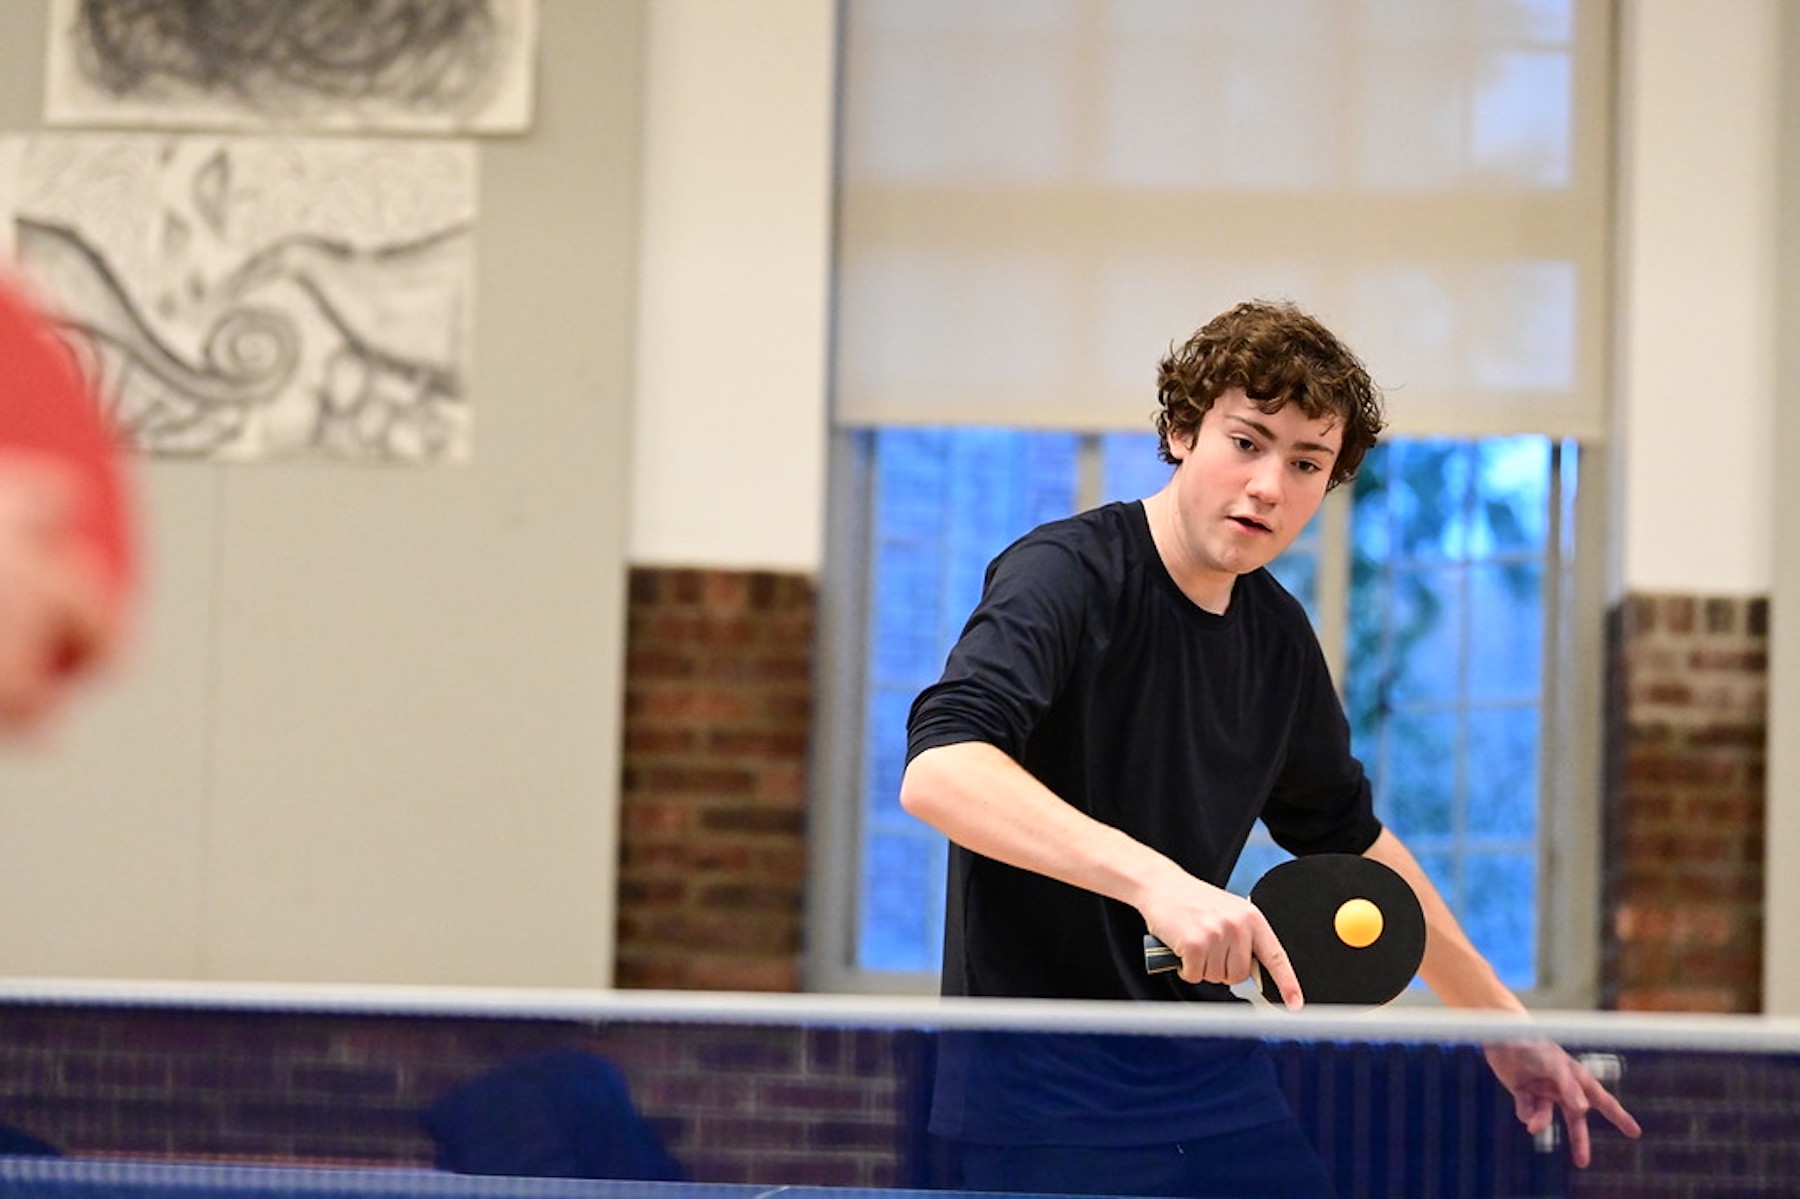 Fieldston Upper student practices table tennis in the Student Commons.